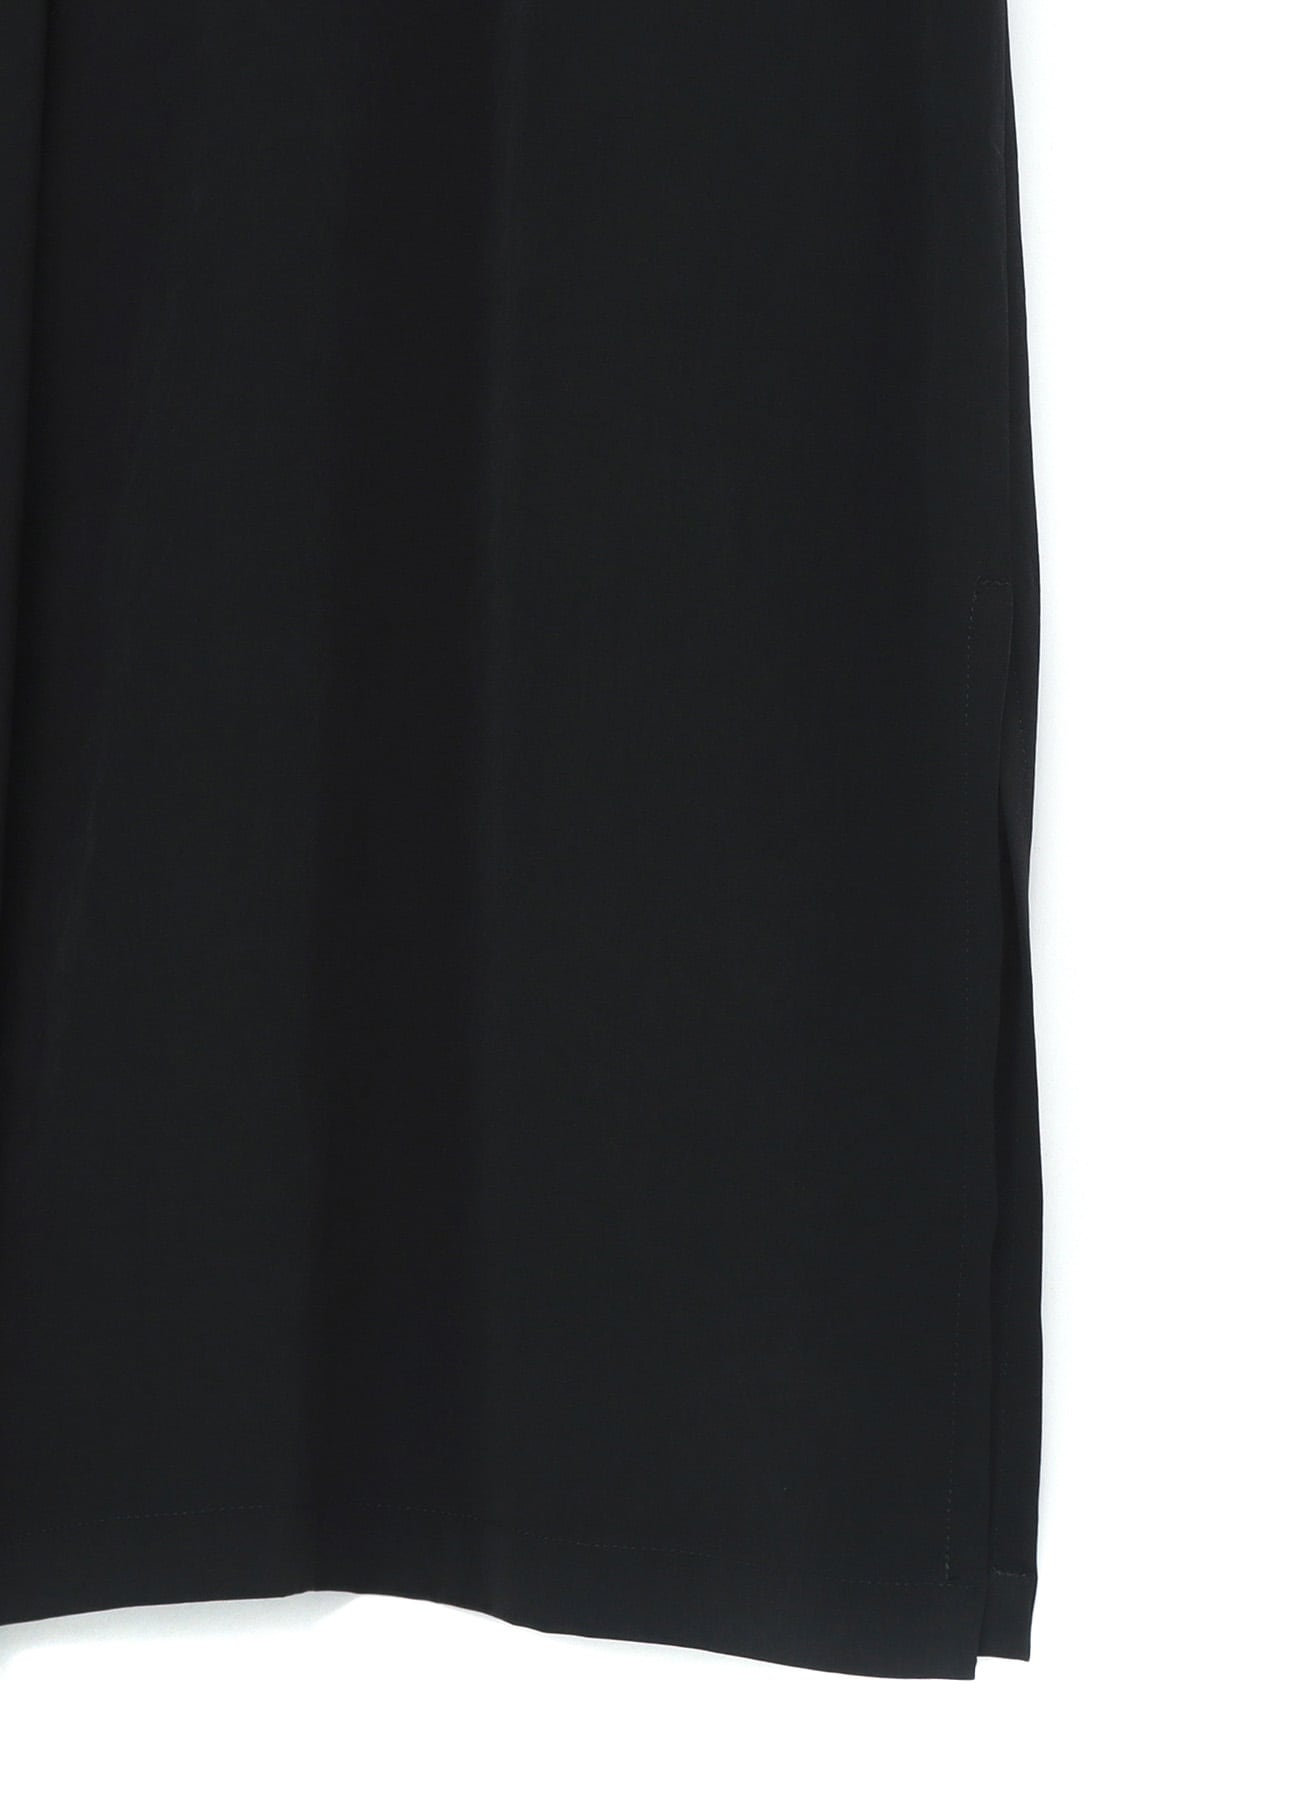 TRIACETATE/POLYESTER CREPE de CHINE SLEEVE LESS DRESS TYPE2